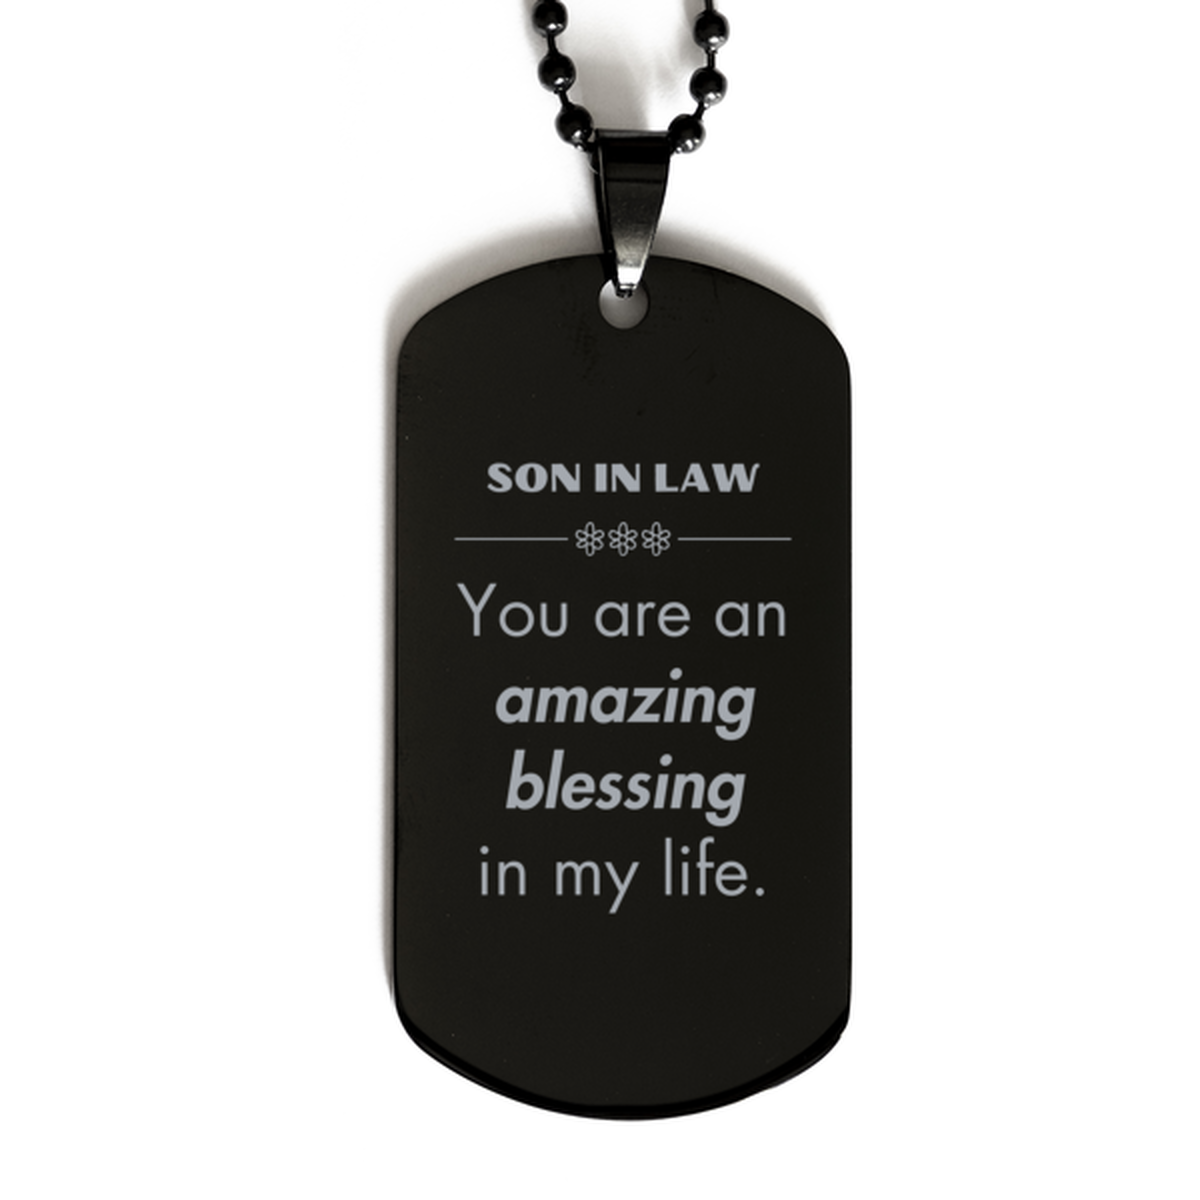 Son In Law Black Dog Tag, You are an amazing blessing in my life, Thank You Gifts For Son In Law, Inspirational Birthday Christmas Unique Gifts For Son In Law